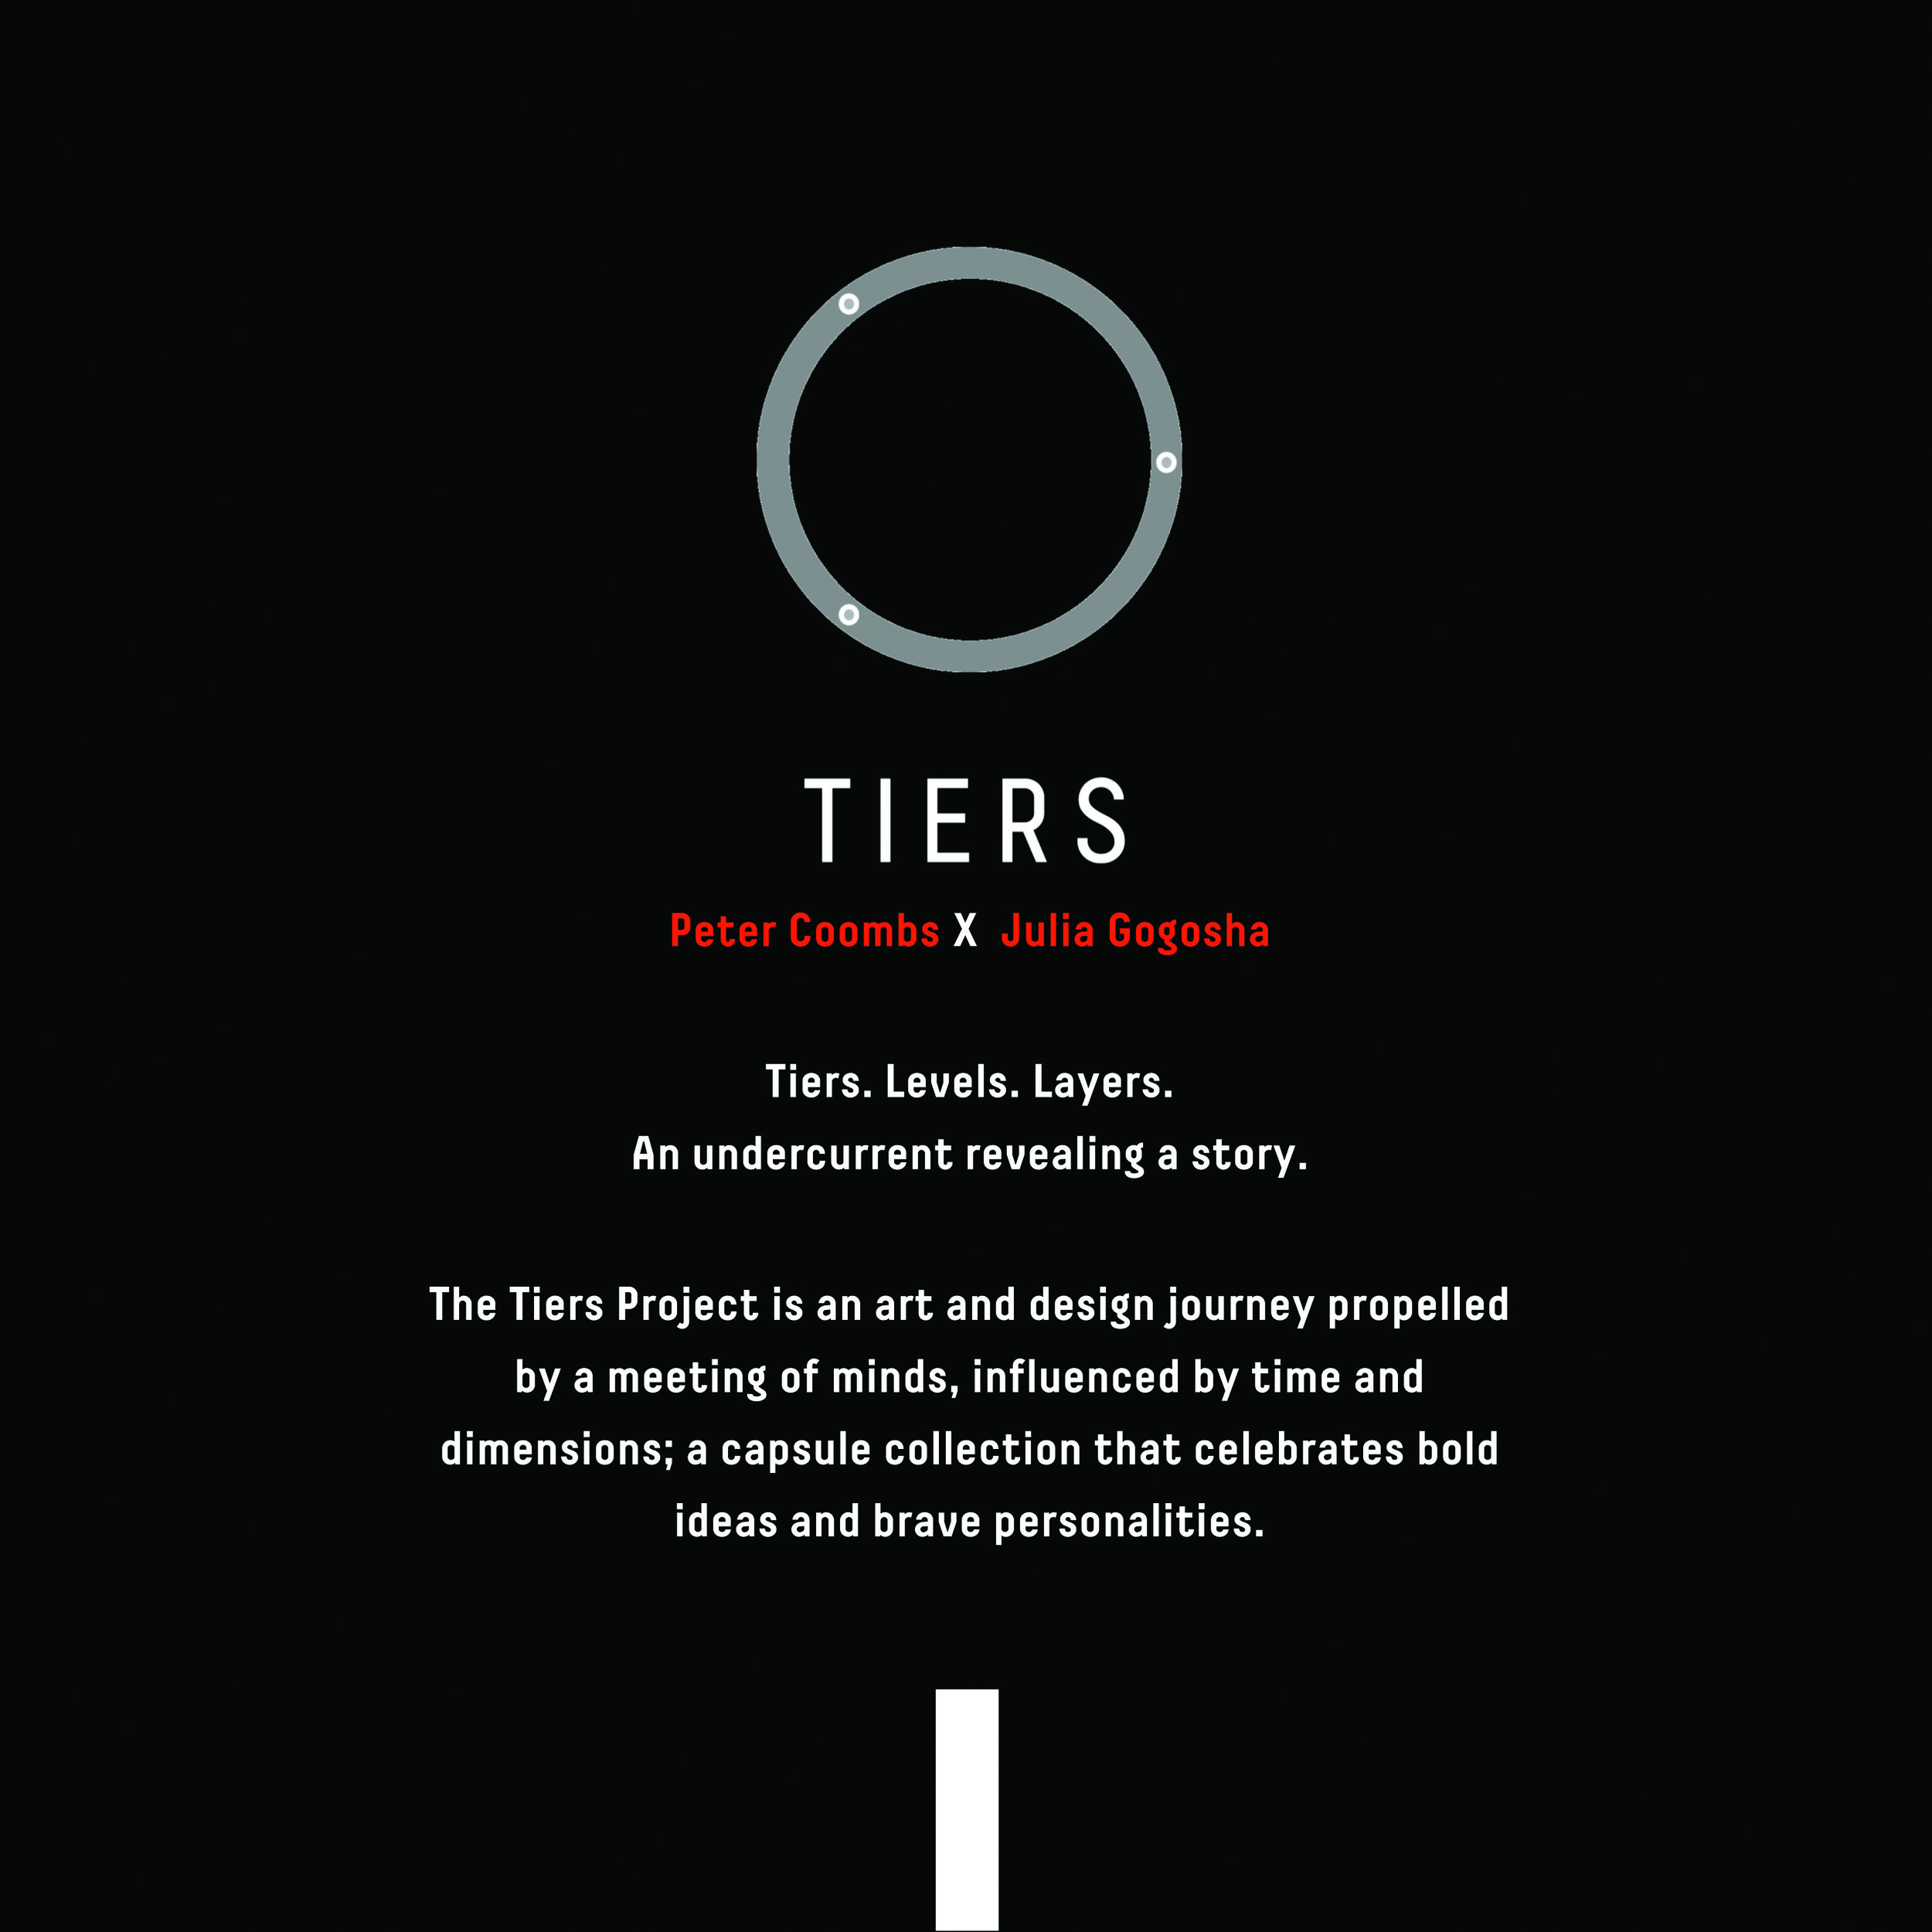 The Tiers Project